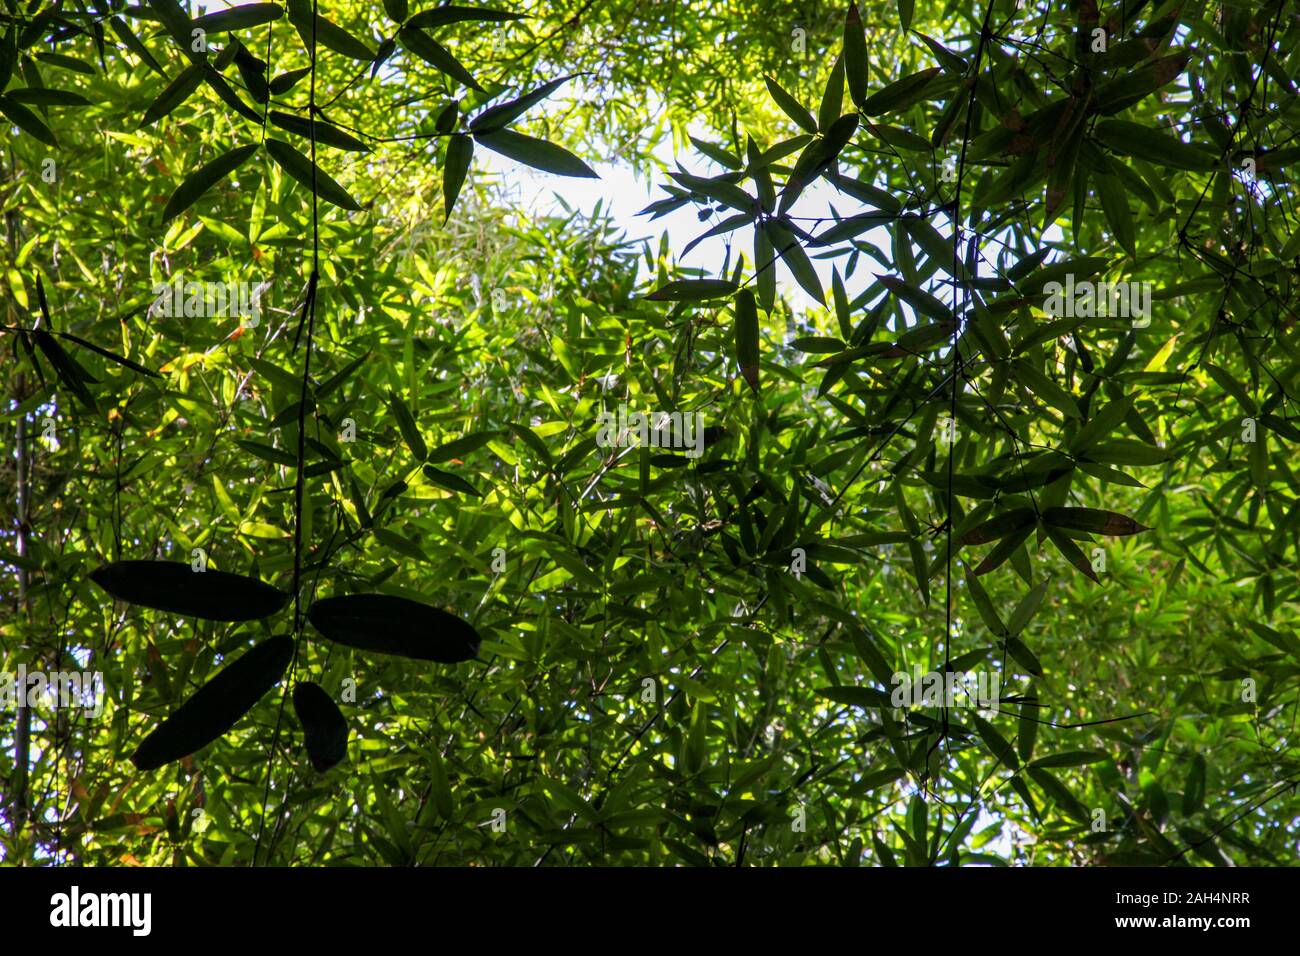 An abstract of green, lush leaves Stock Photo